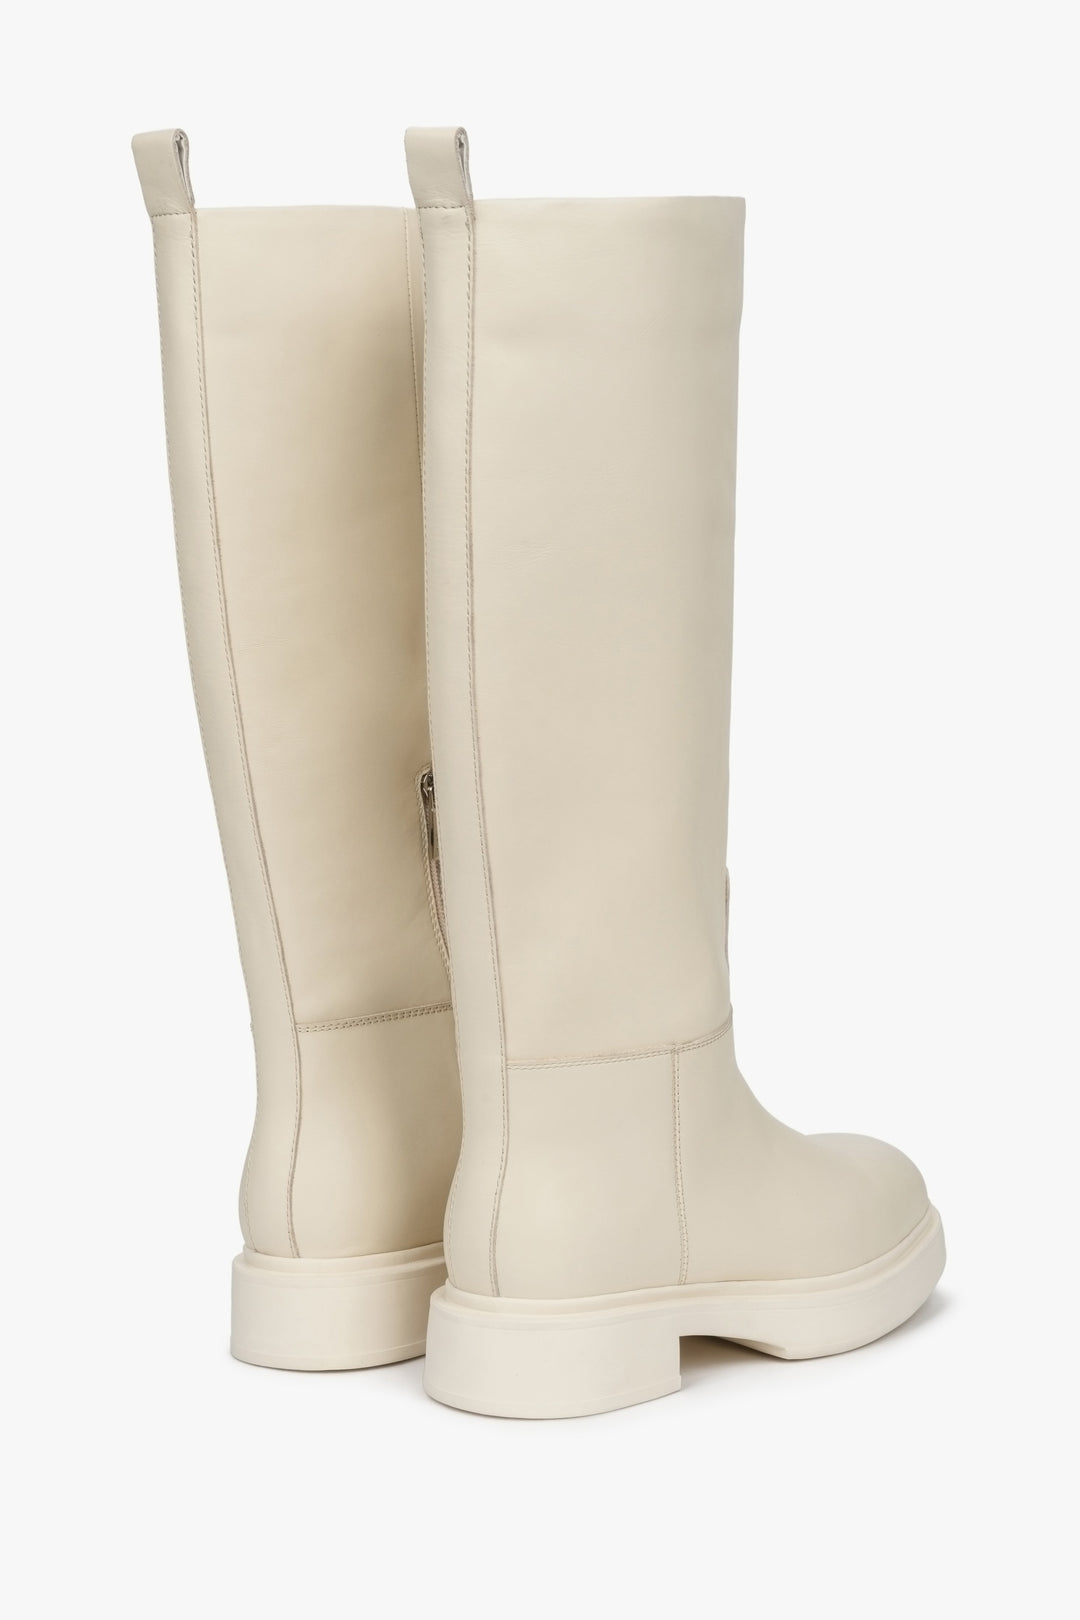 Winter women's beige boots by Estro with fur lining - close-up of the back of the boot.